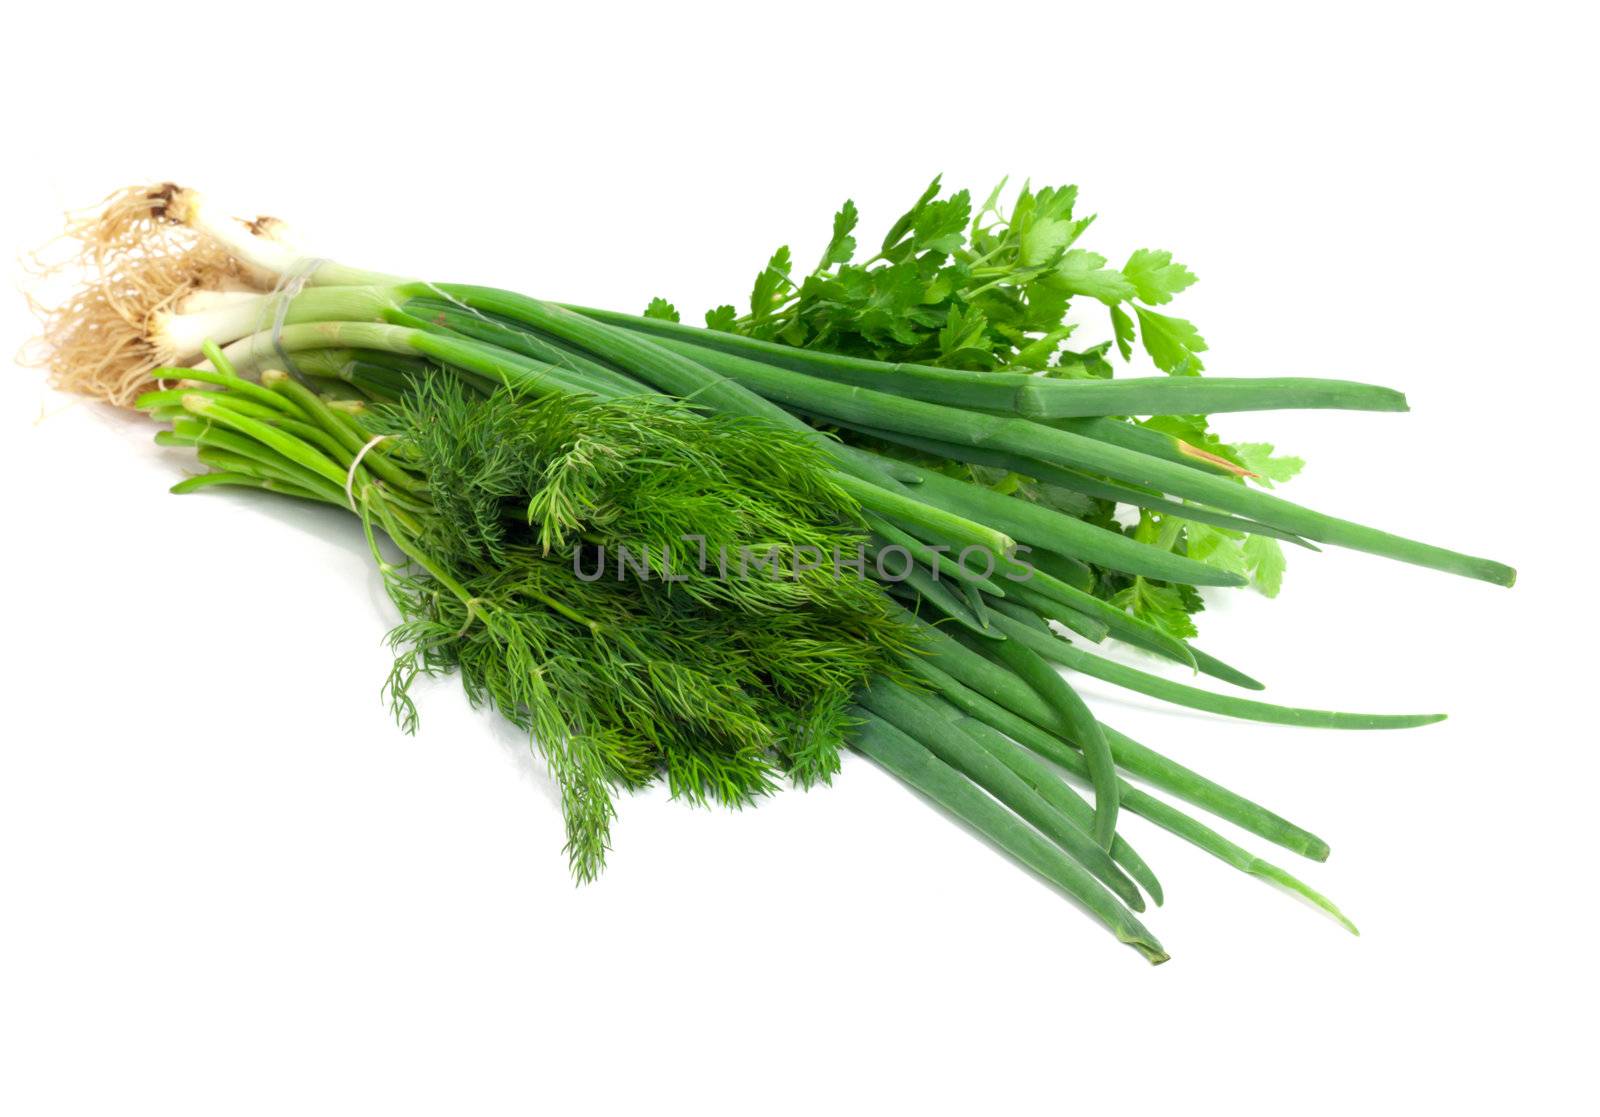 Parsley, fennel and green onions by schankz